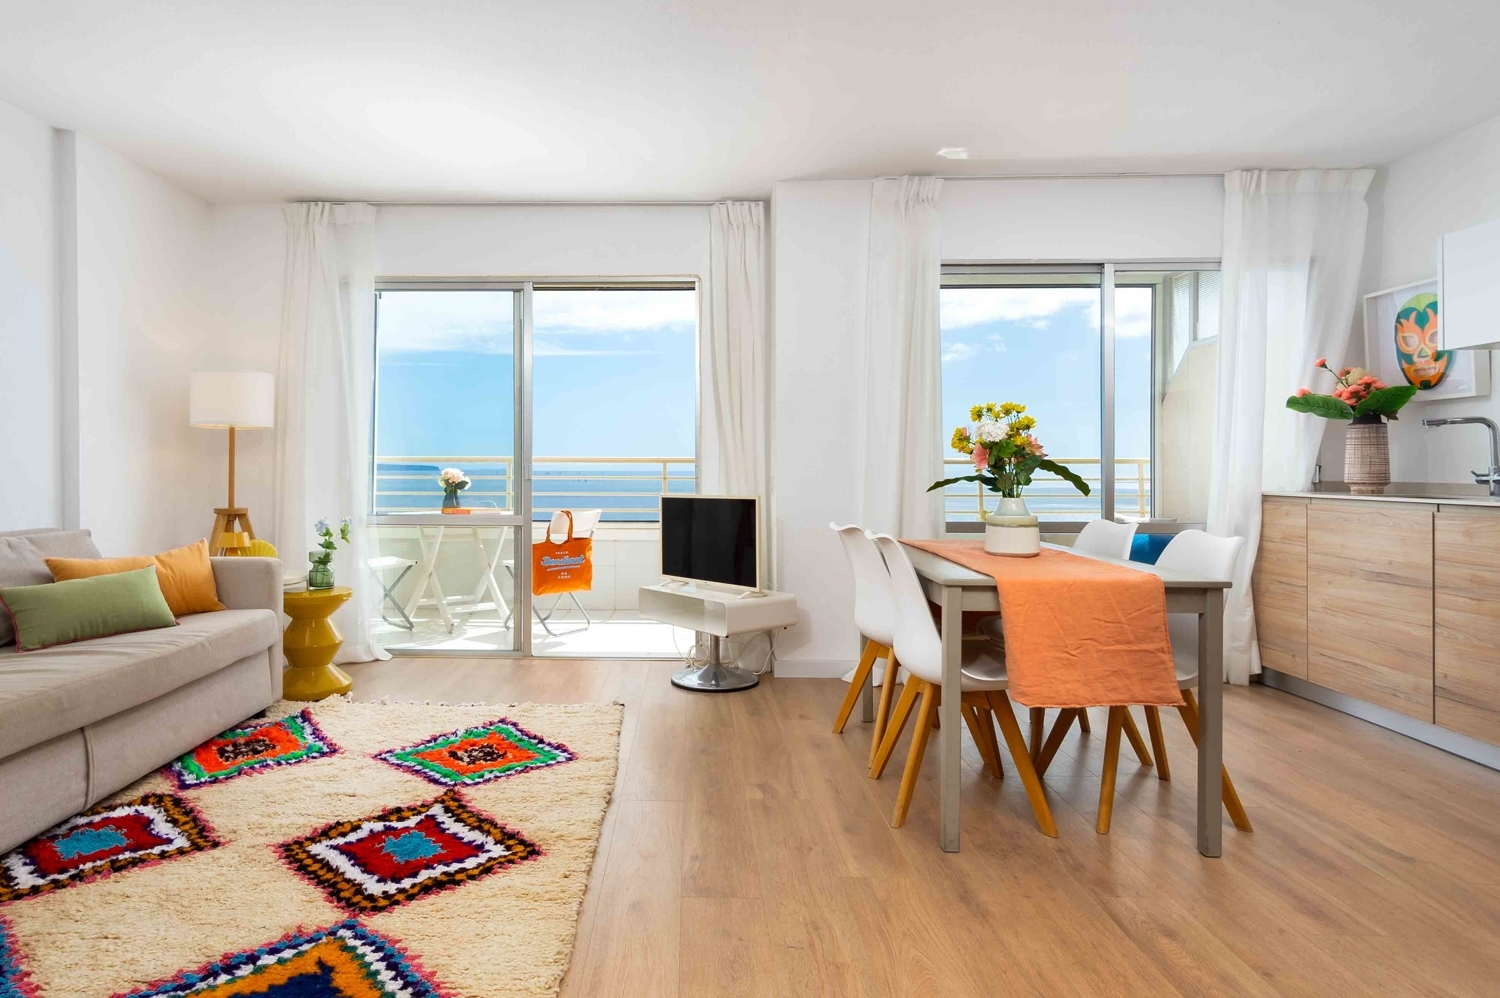 STUNNING SEASIDE APARTMENT WITH SPECTACULAR VIEWS IN PRIME LOCATION AT CALA MAYOR